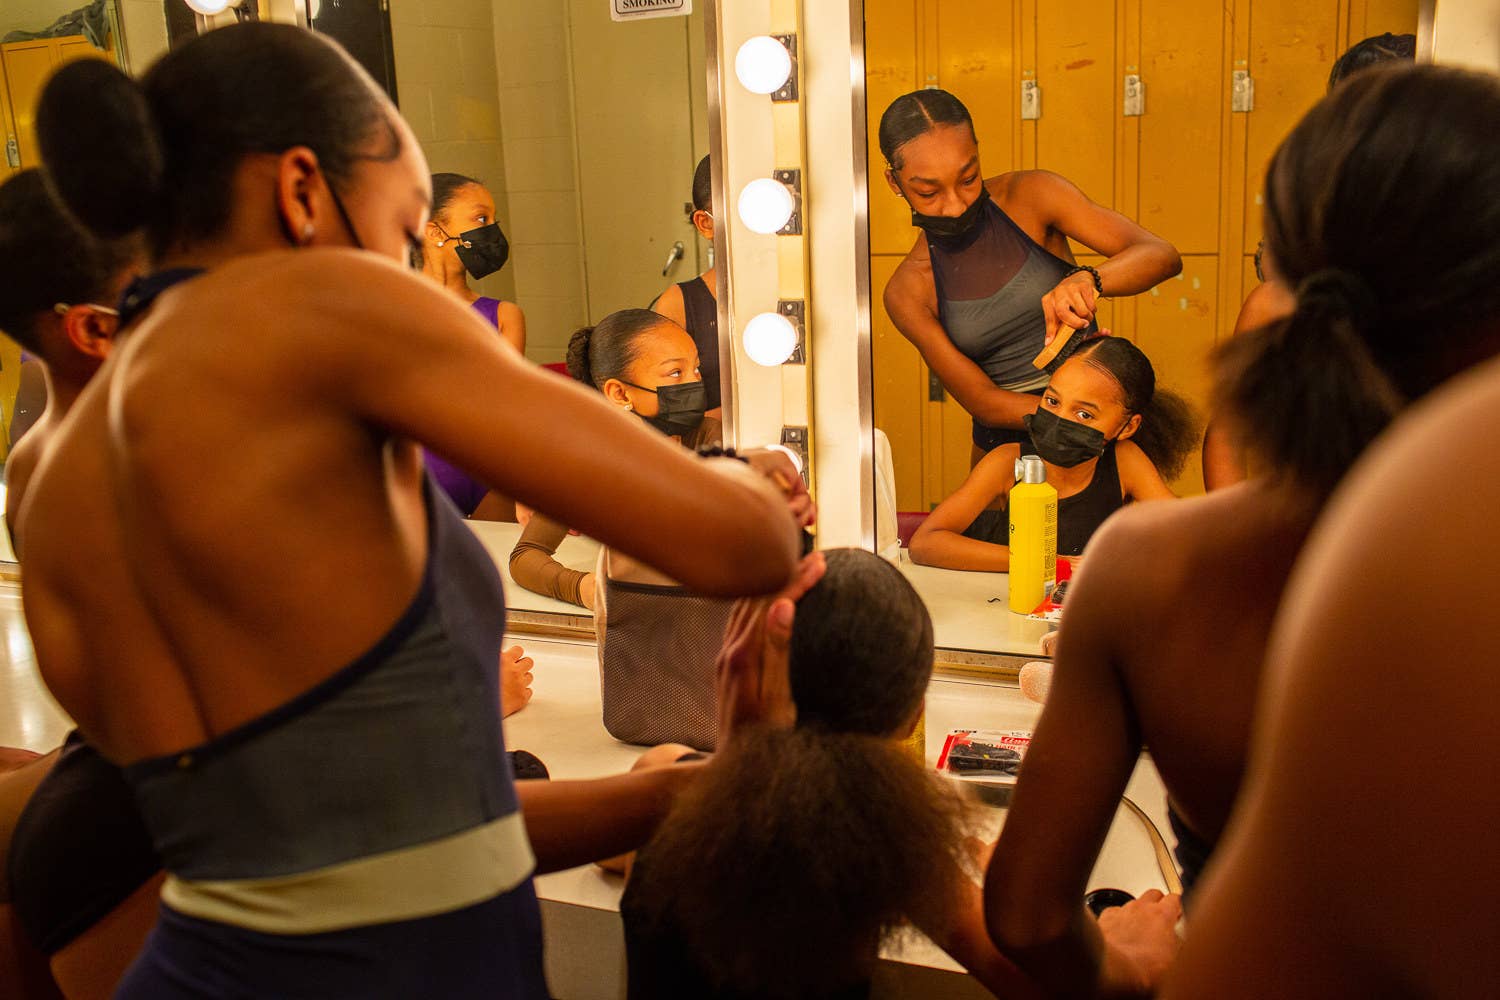 dancers getting ready in the mirror